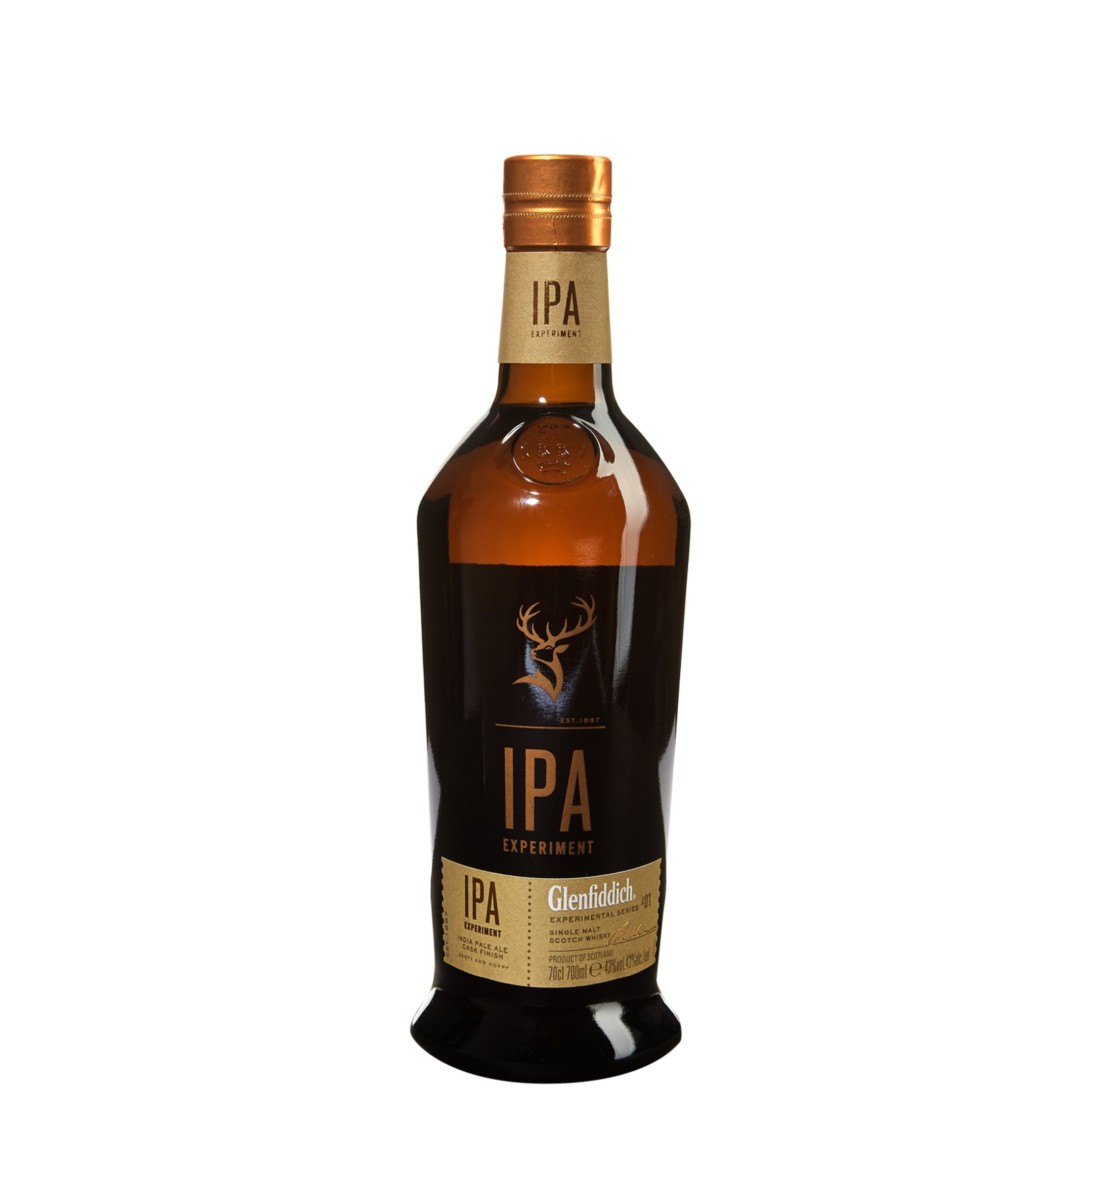 Glenfiddich IPA Experiment Whisky 0.7L